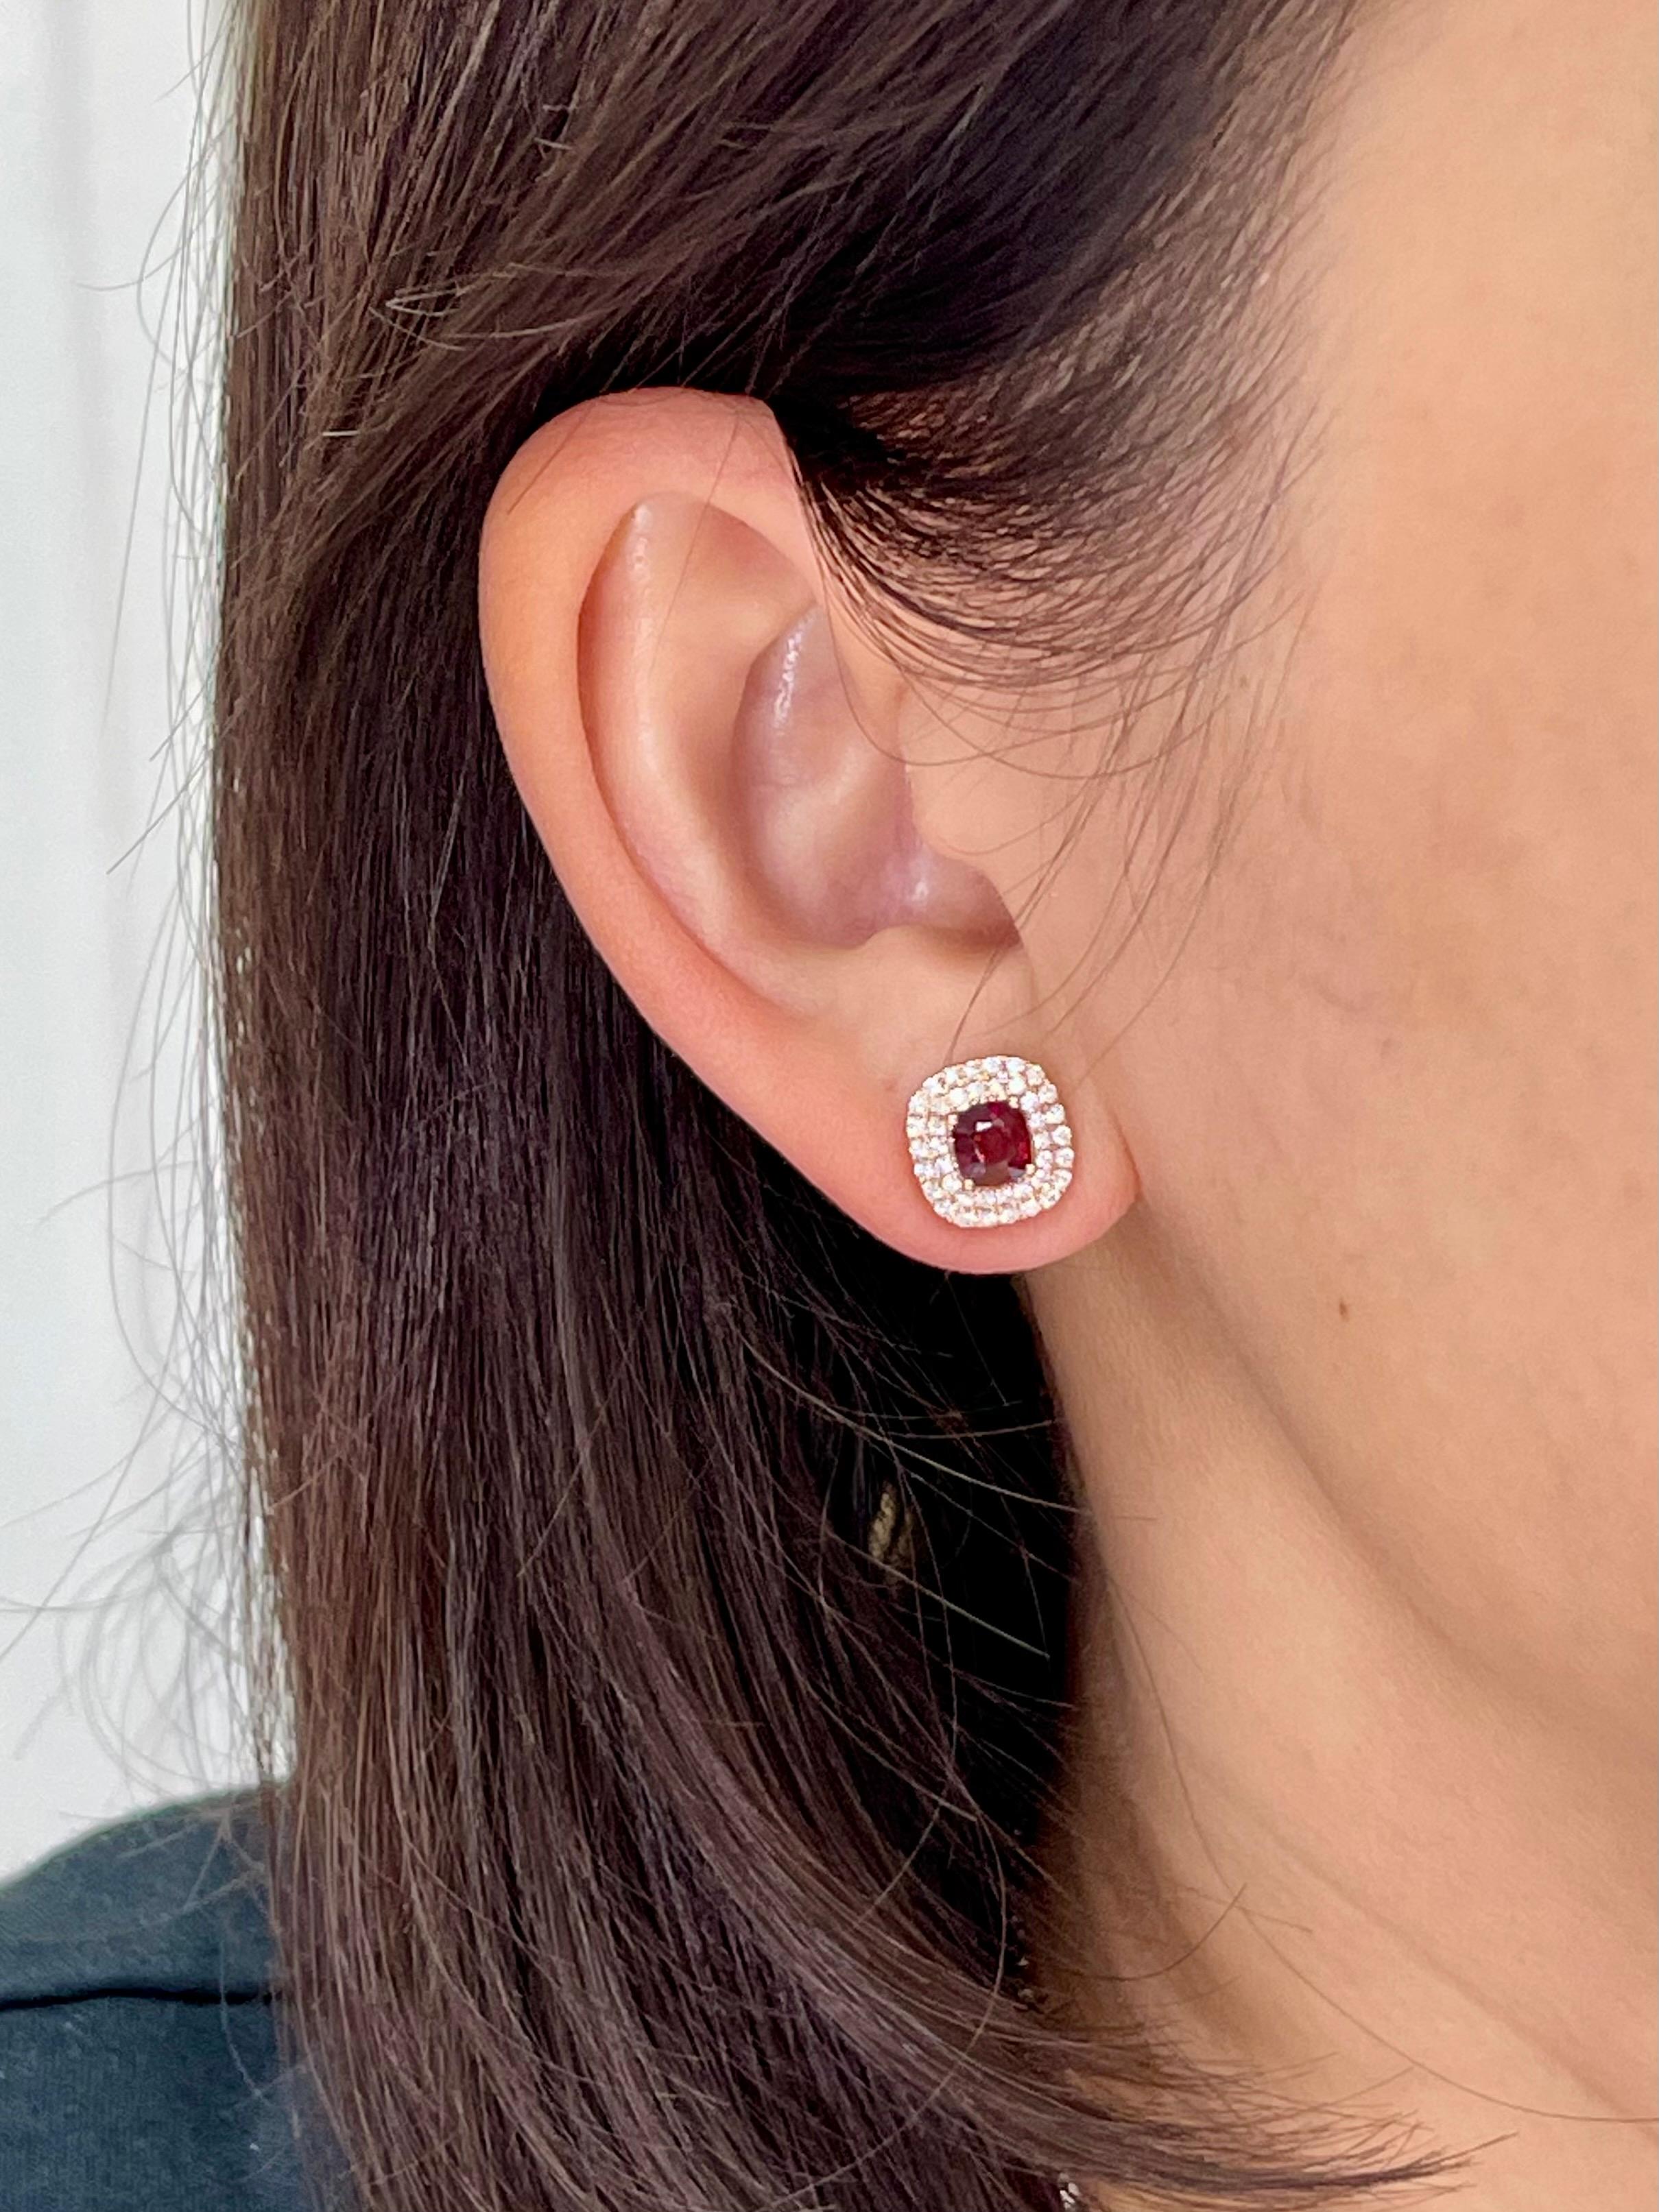 Please check out the HD video. Here is a pair of glowing vivid red spinel stud earrings. The earrings are set in 18k rose gold and diamonds. Two vivid red spinels total 1.47cts. There are 0.55Cts of round brilliant full cut diamonds in this double